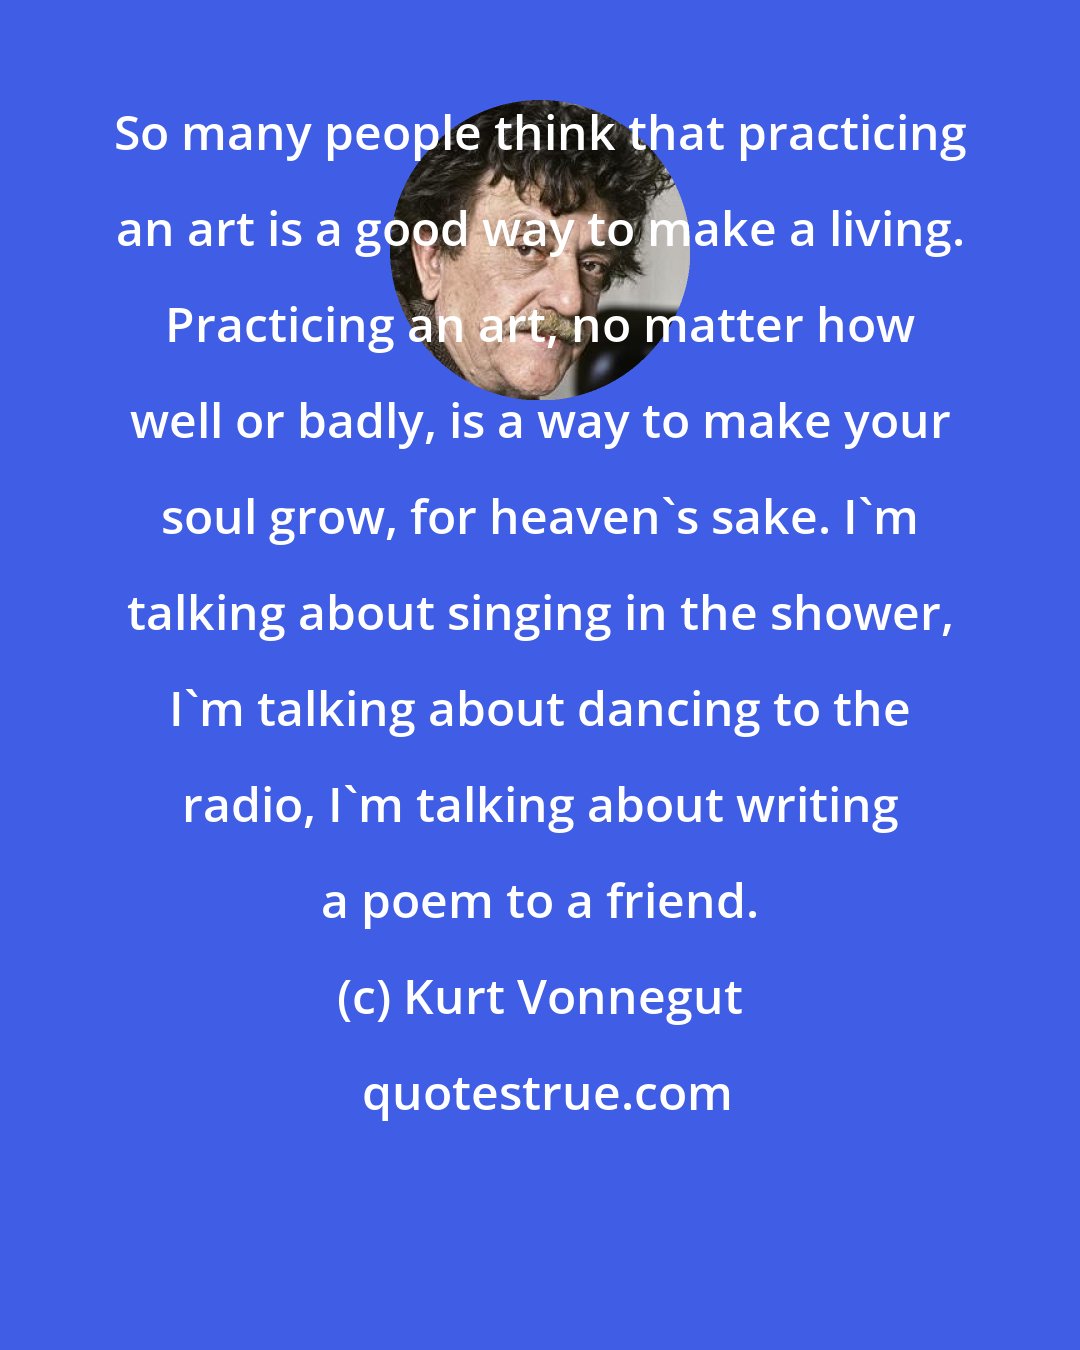 Kurt Vonnegut: So many people think that practicing an art is a good way to make a living. Practicing an art, no matter how well or badly, is a way to make your soul grow, for heaven's sake. I'm talking about singing in the shower, I'm talking about dancing to the radio, I'm talking about writing a poem to a friend.